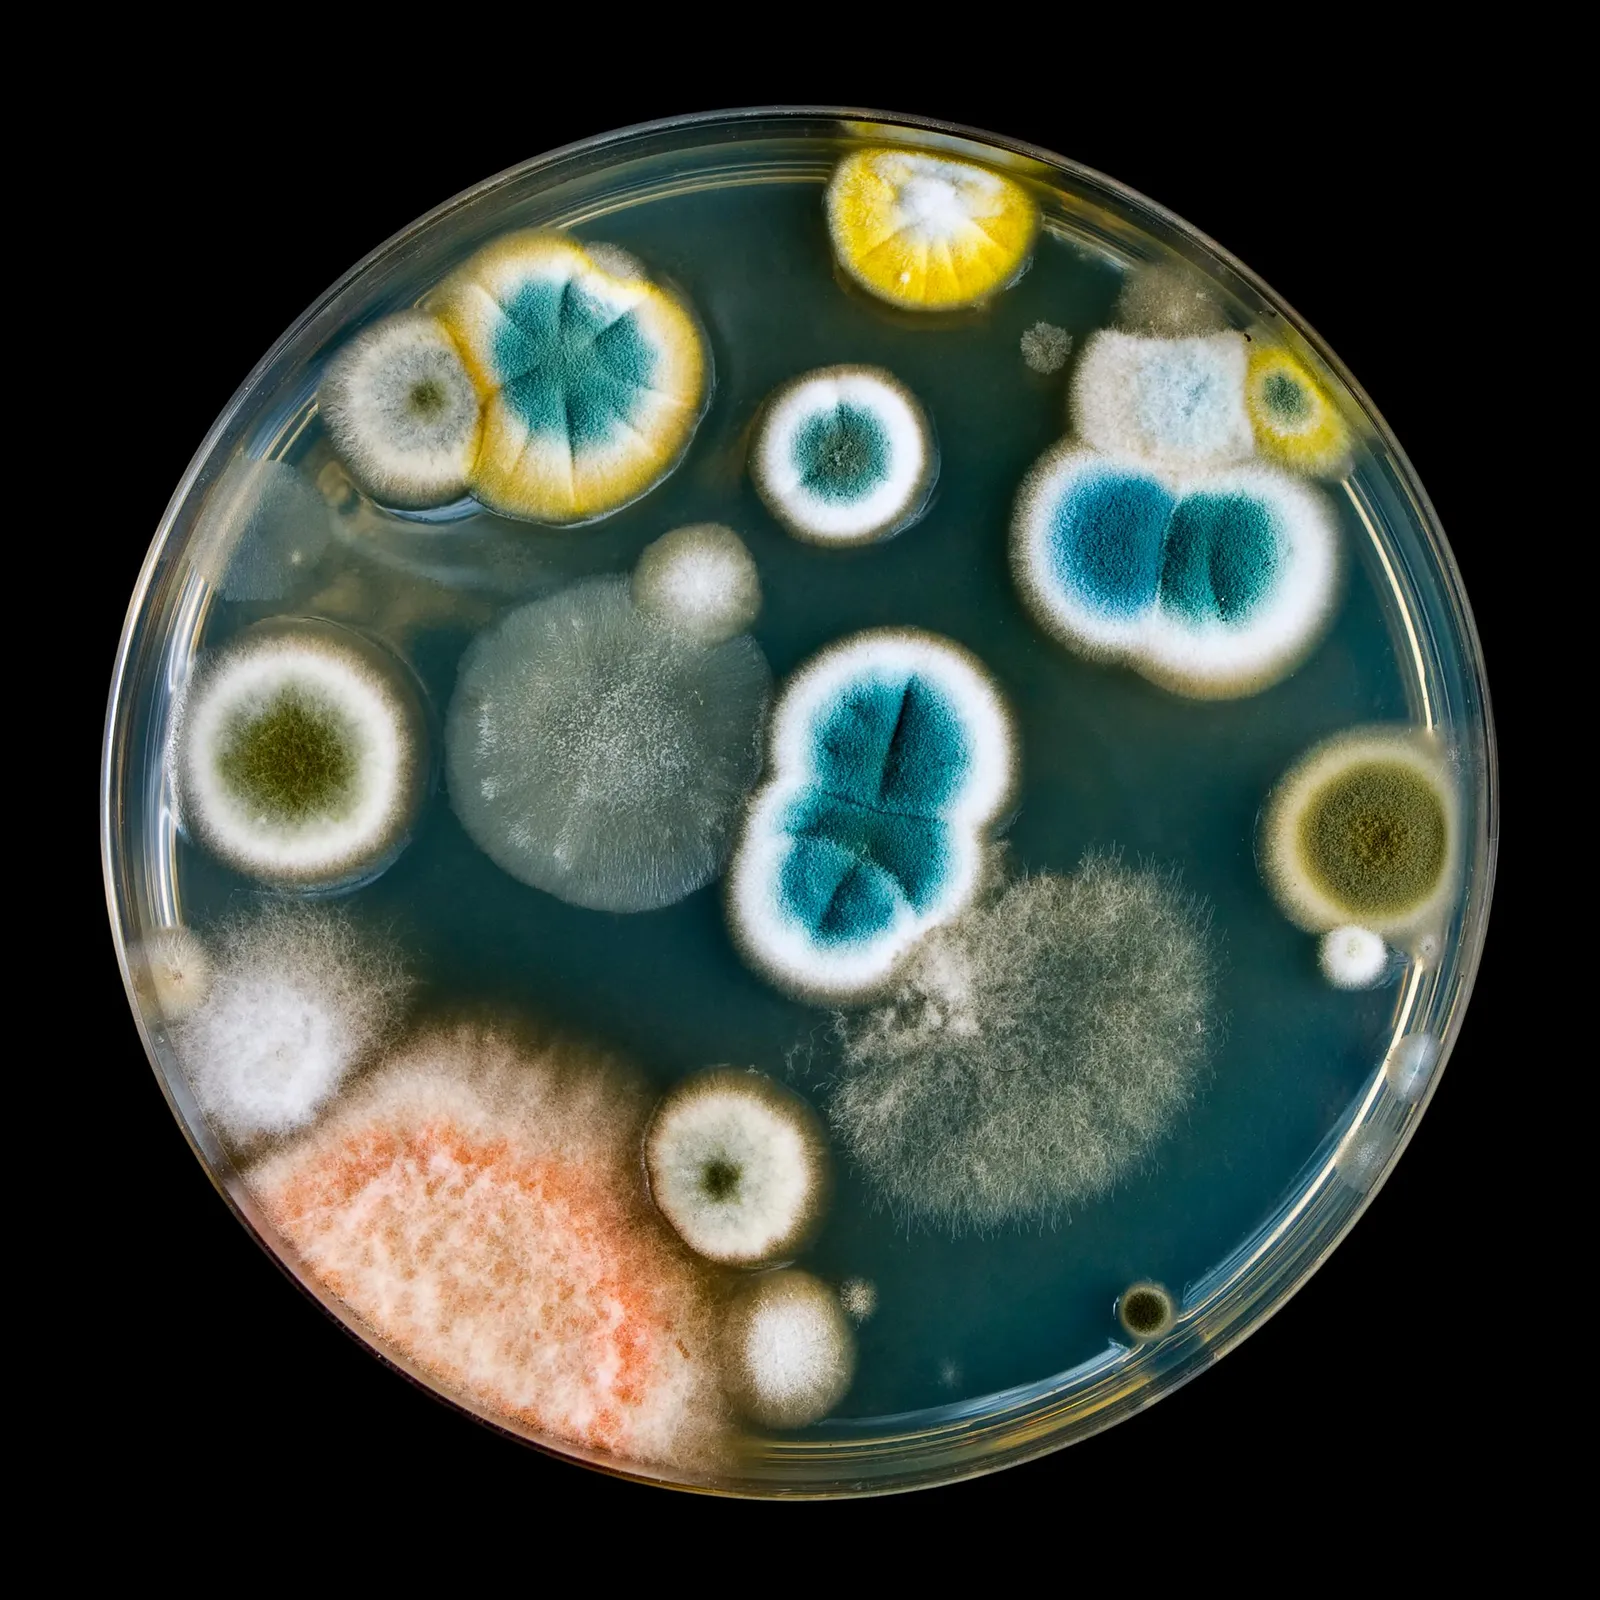 11 Reasons to Love Bacteria, Fungi and Spores | Science| Smithsonian  Magazine